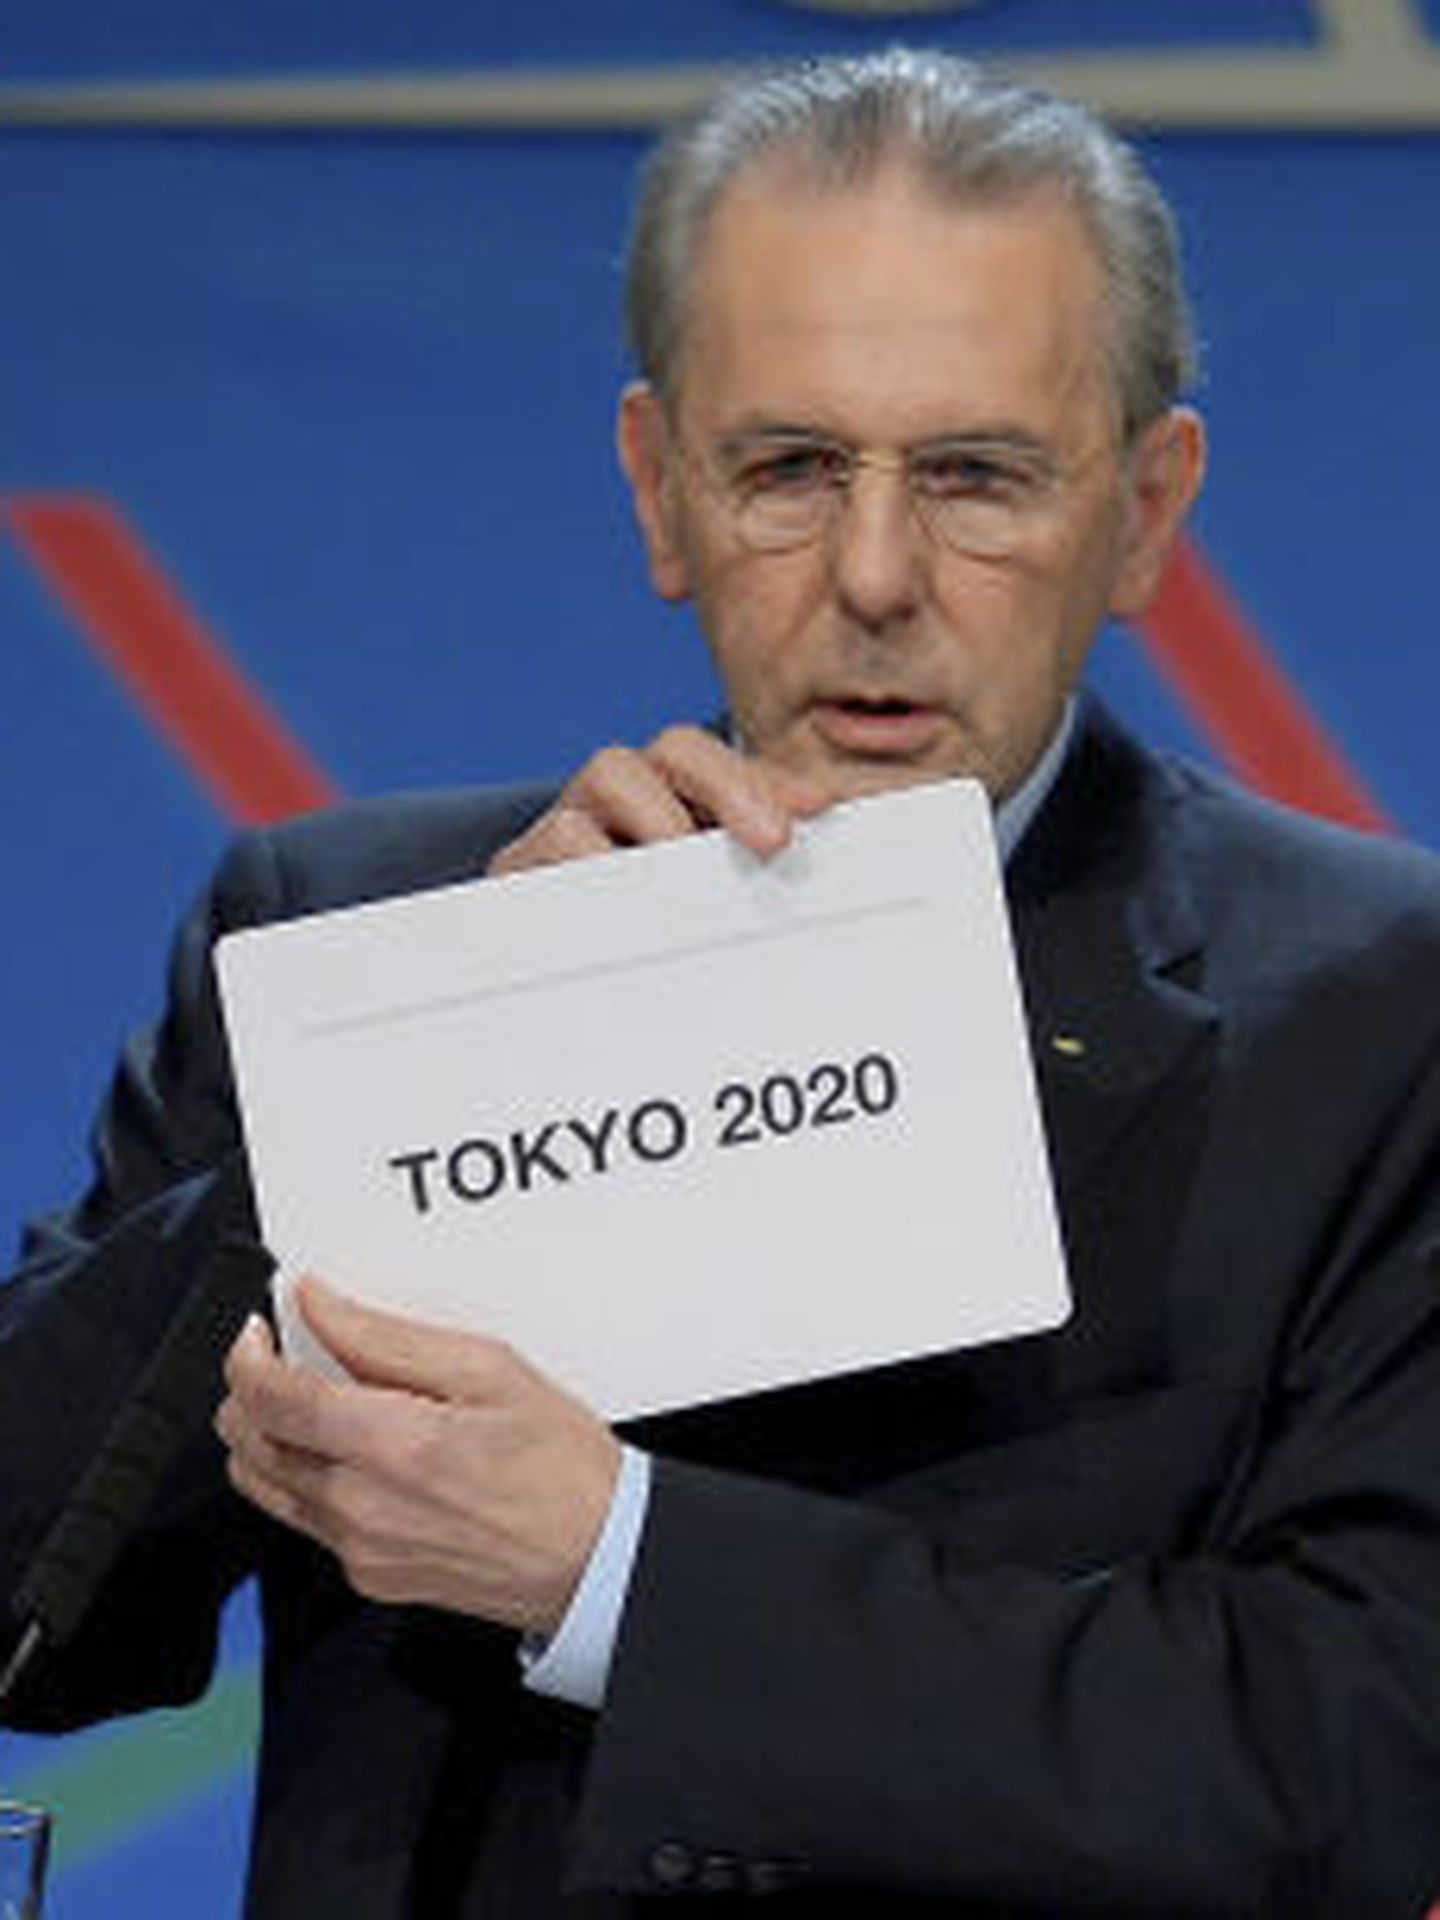 Jacques Rogge President of the International Olympic Committee announces Tokyo as the city to host the 2020 Summer Olympic Game during a ceremony in Buenos Aires